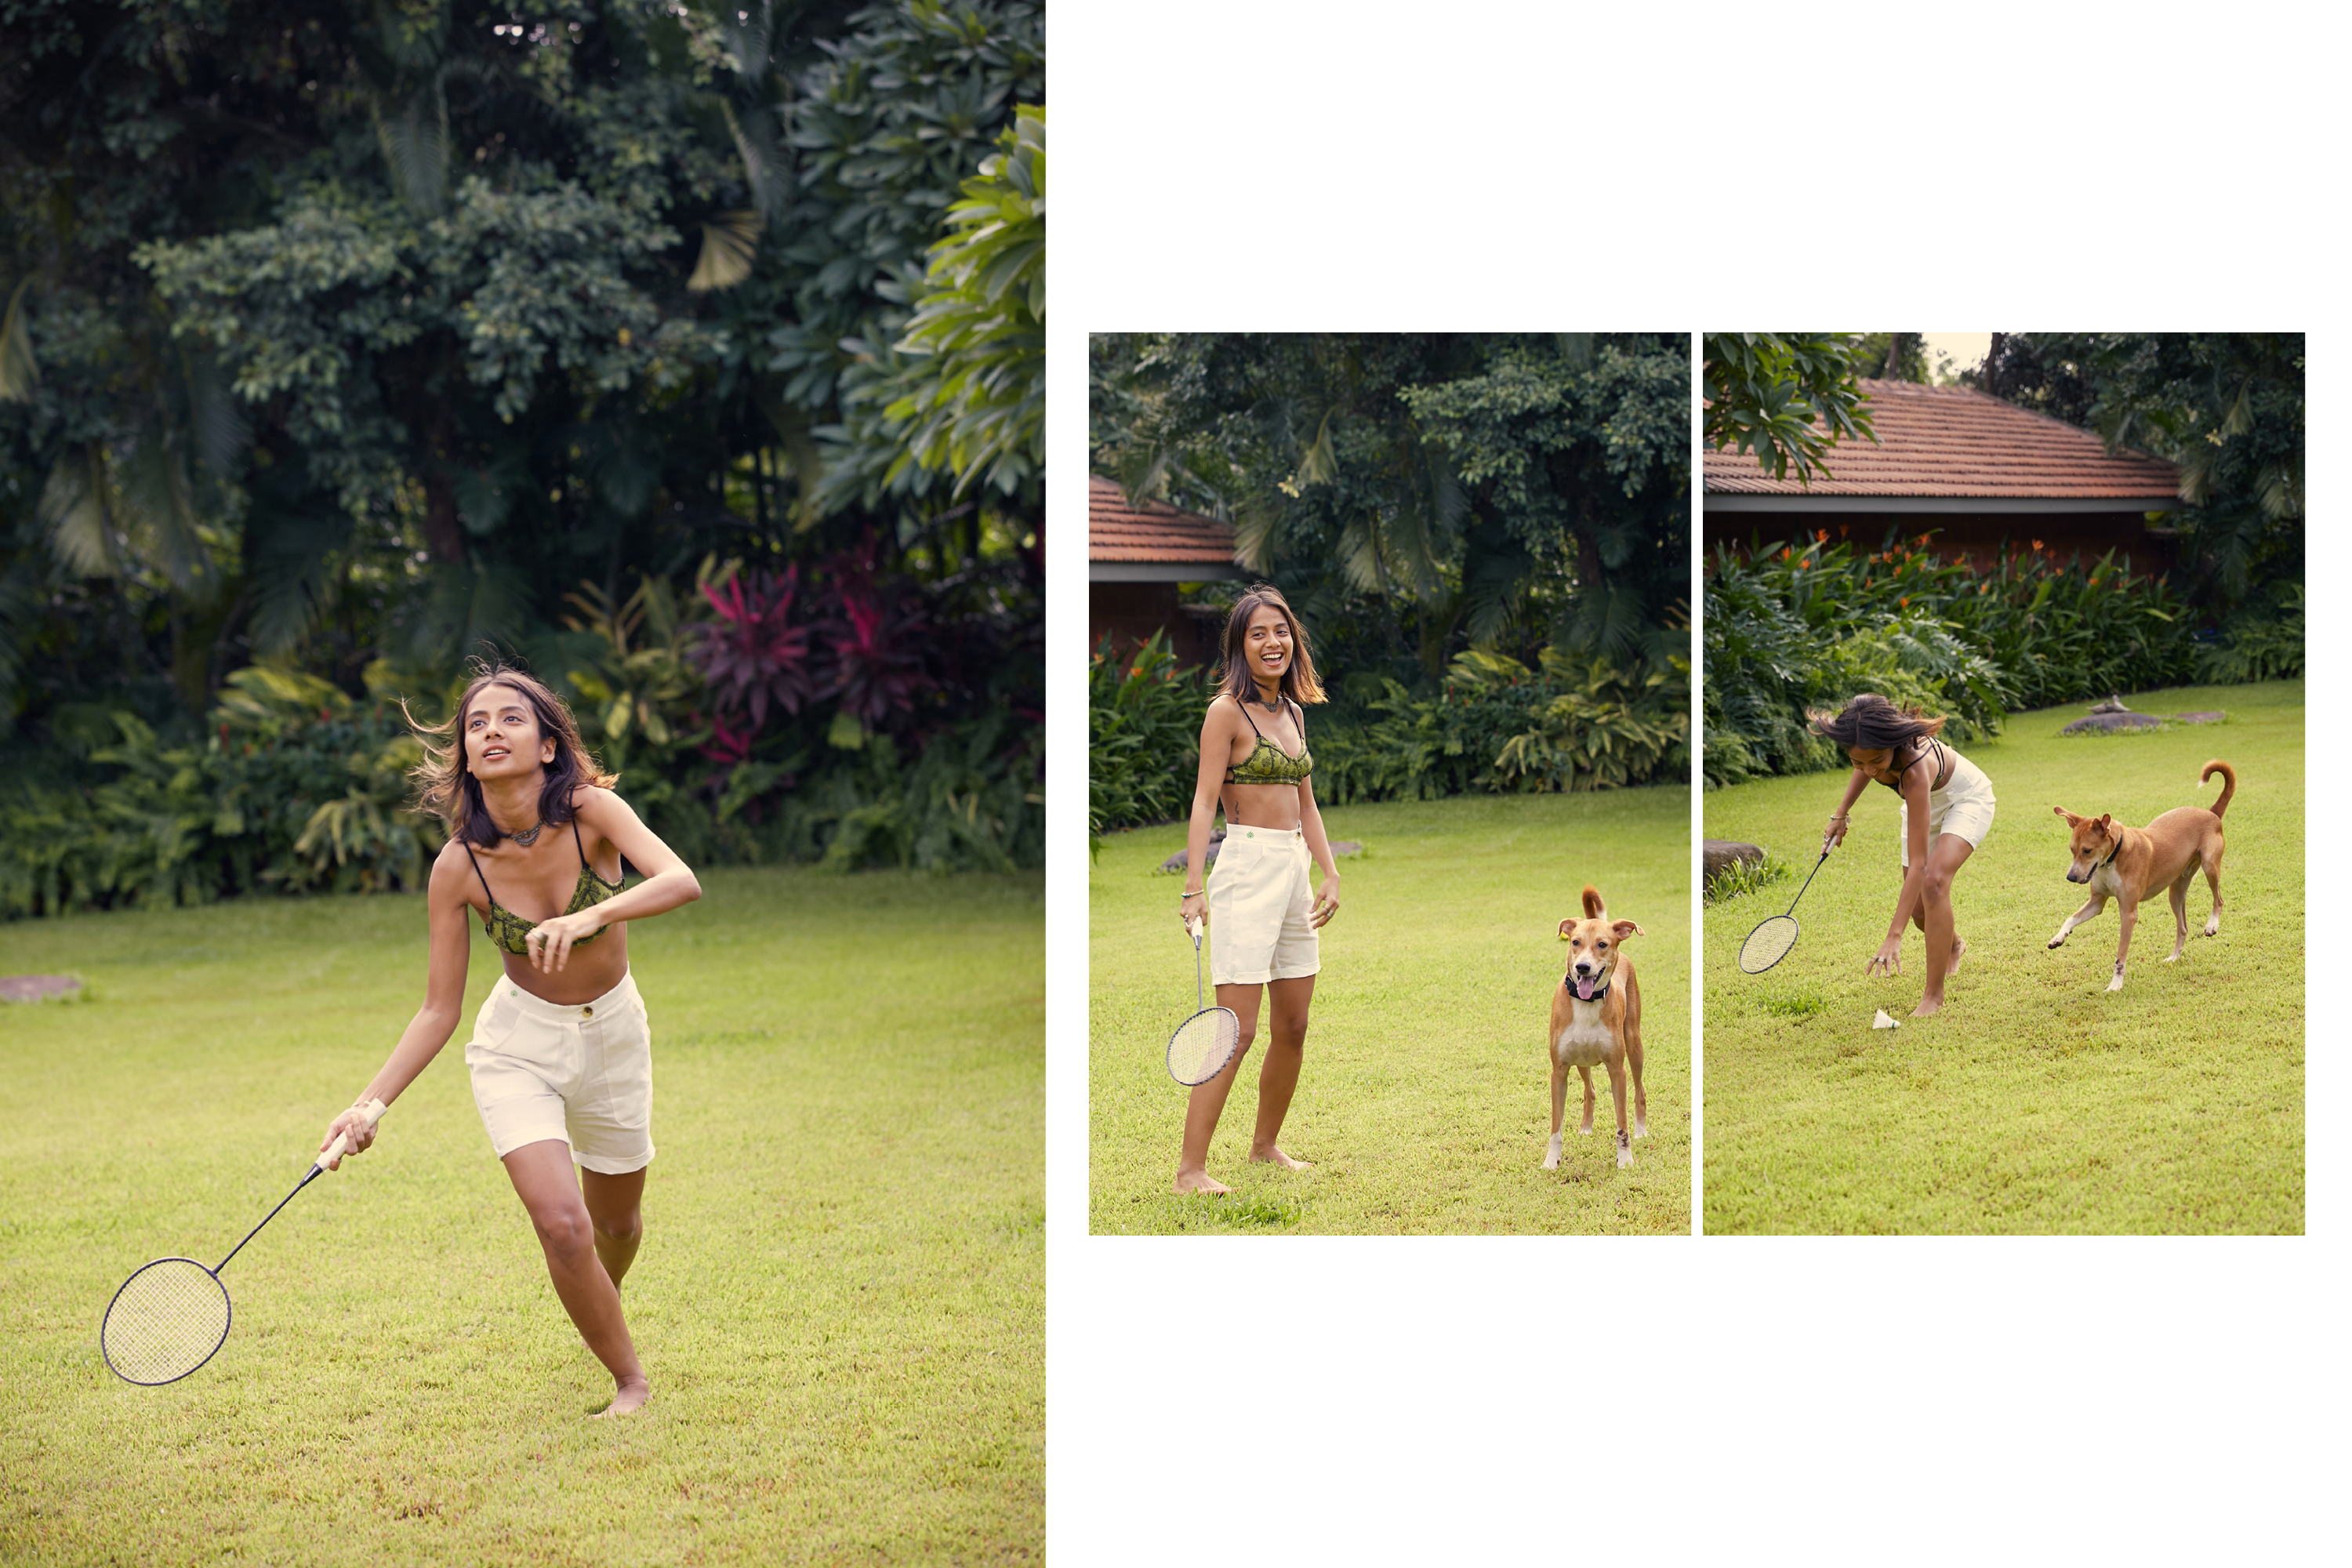 A Day with Paloma - Believer of Natural Lifestyle, A Dog Lover, Surfer, Fitness Enthusiast, Fashion Model